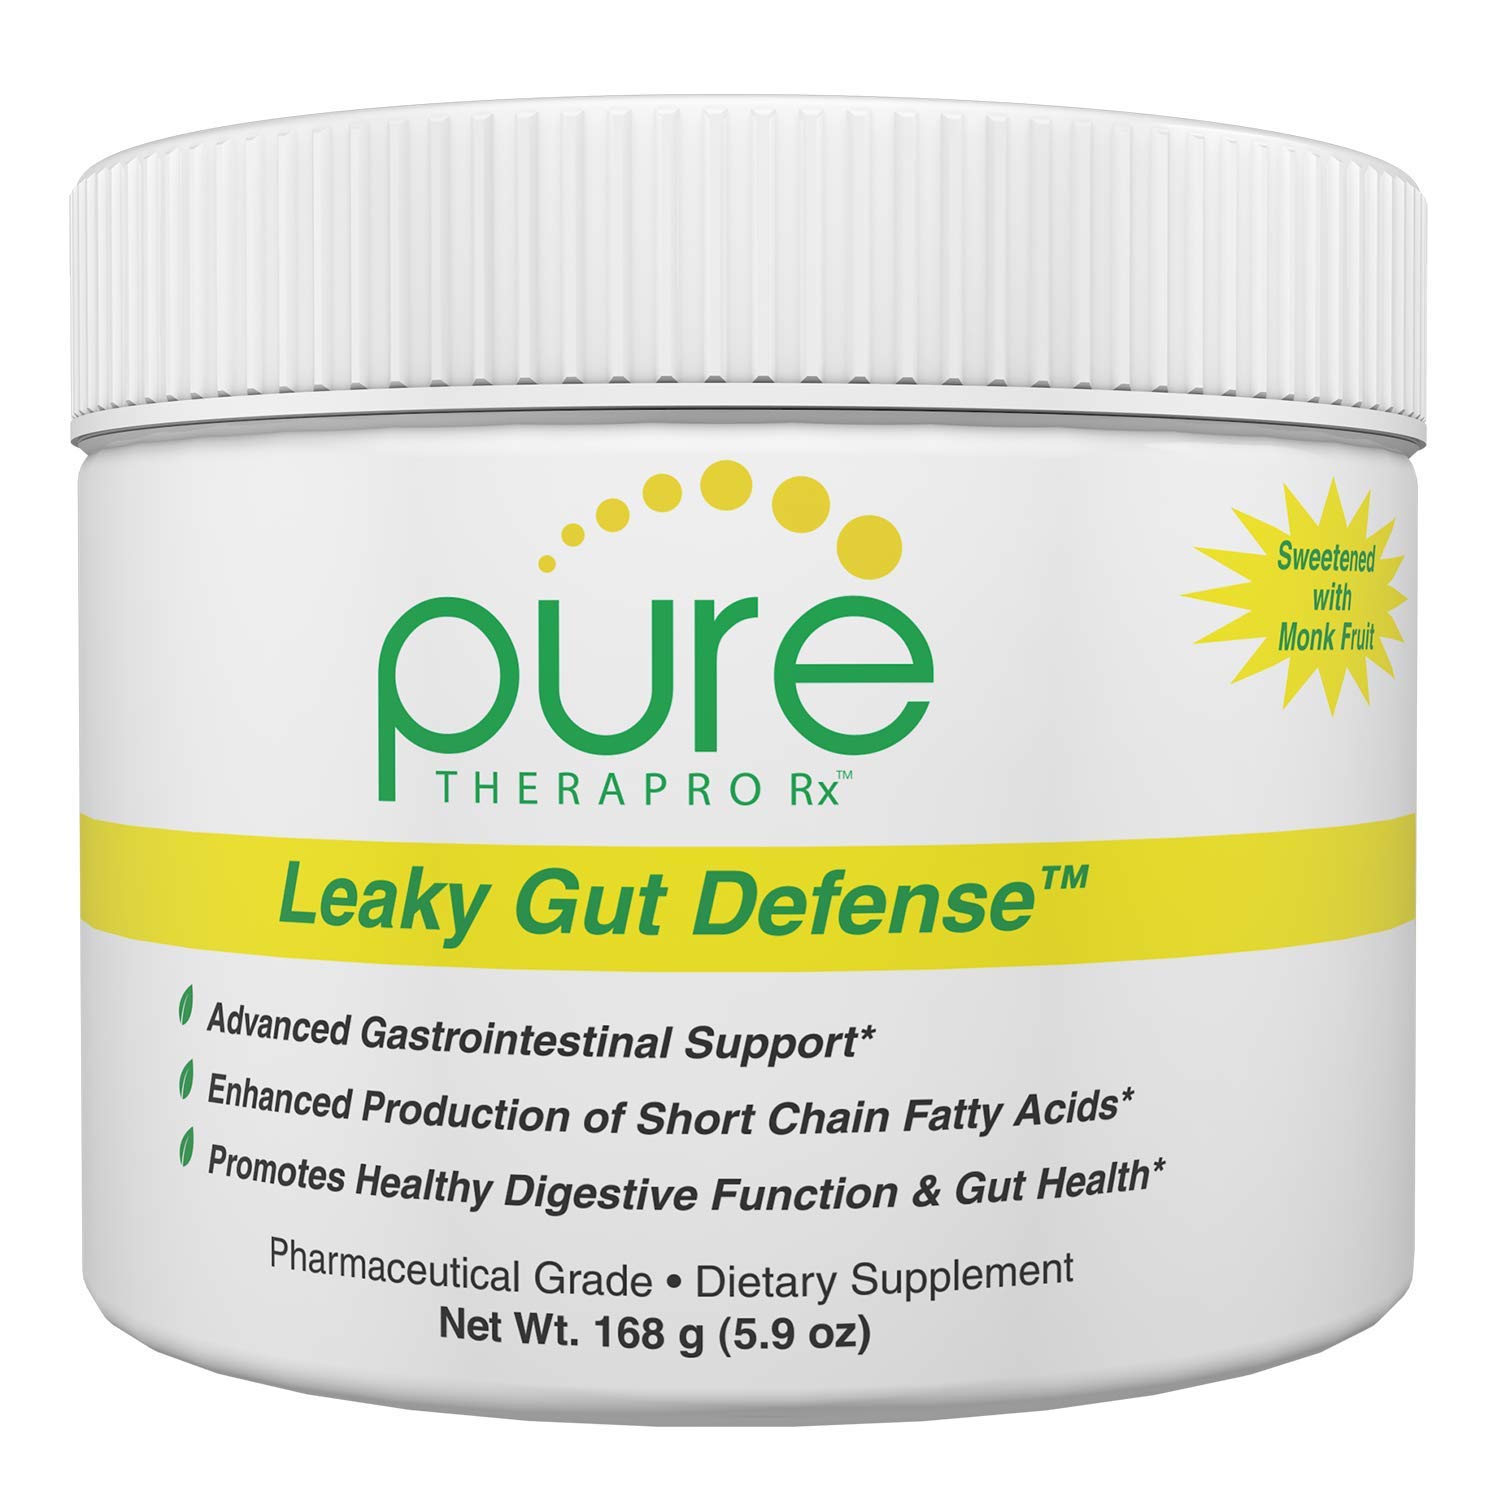 Pure Therapro Rx Leaky Gut Defense Supplement